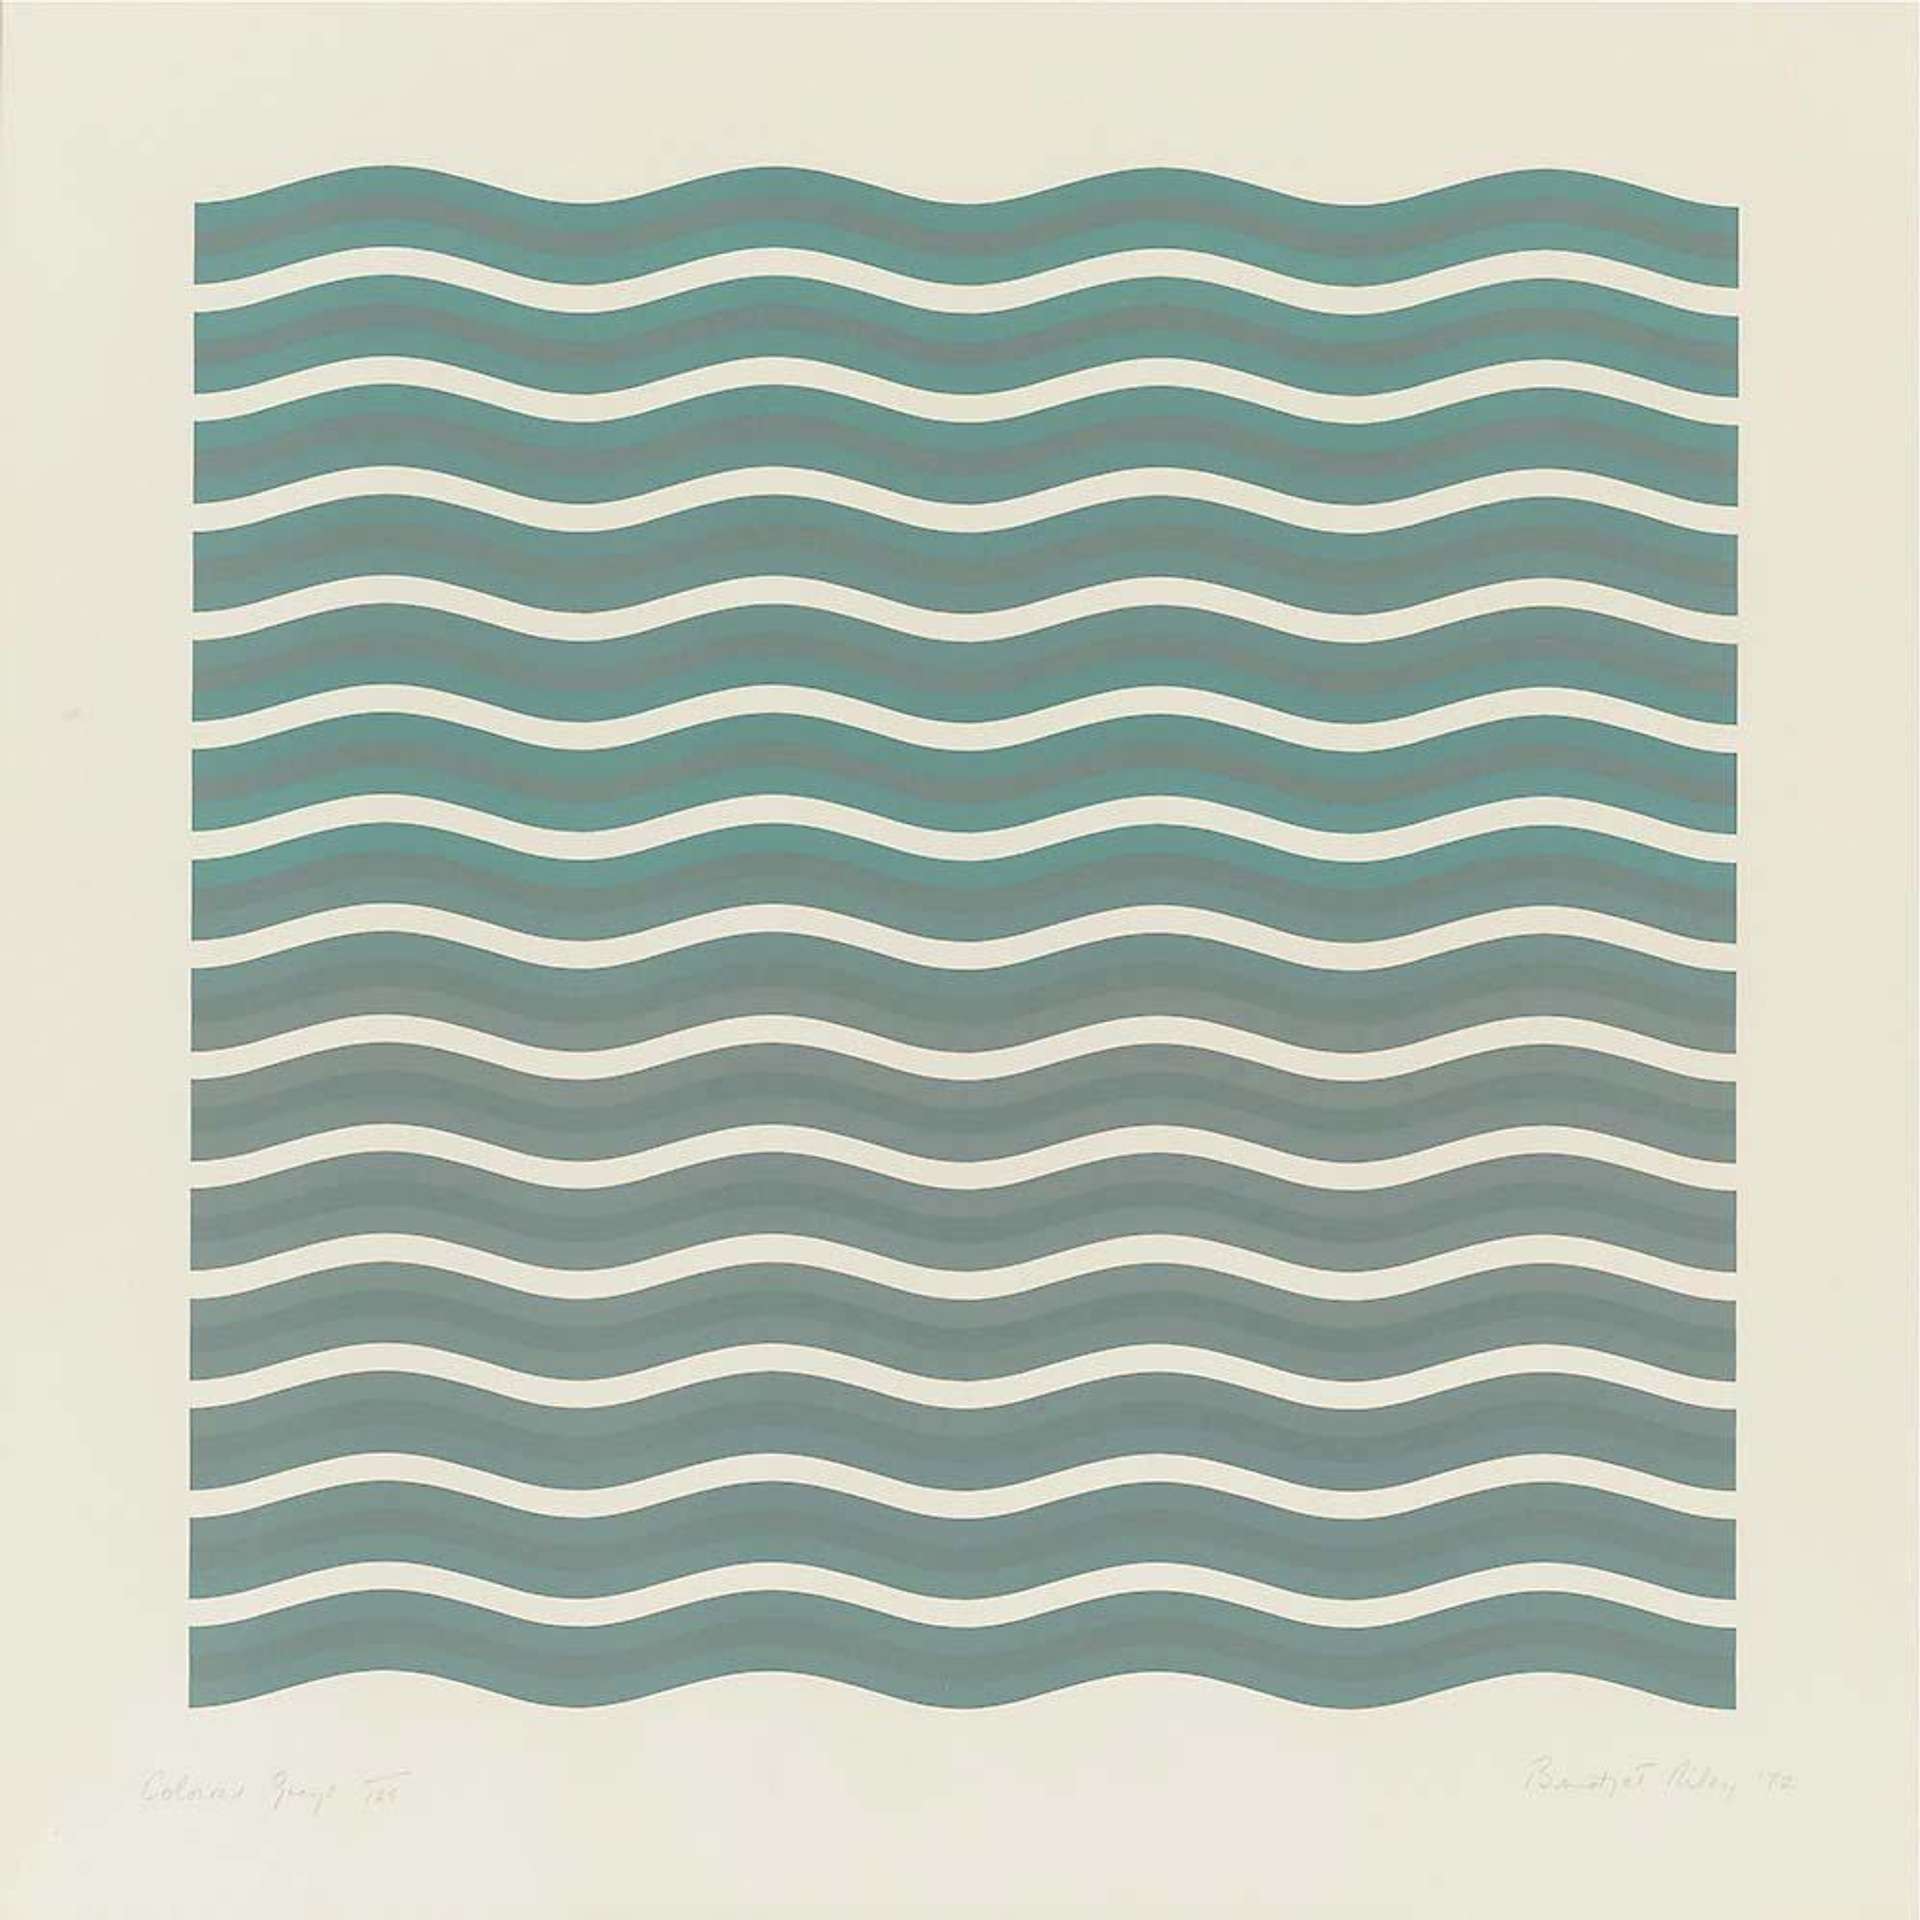 A number of blue-grey lines ondulate across a white background, in a work typical of artist Bridget Riley.